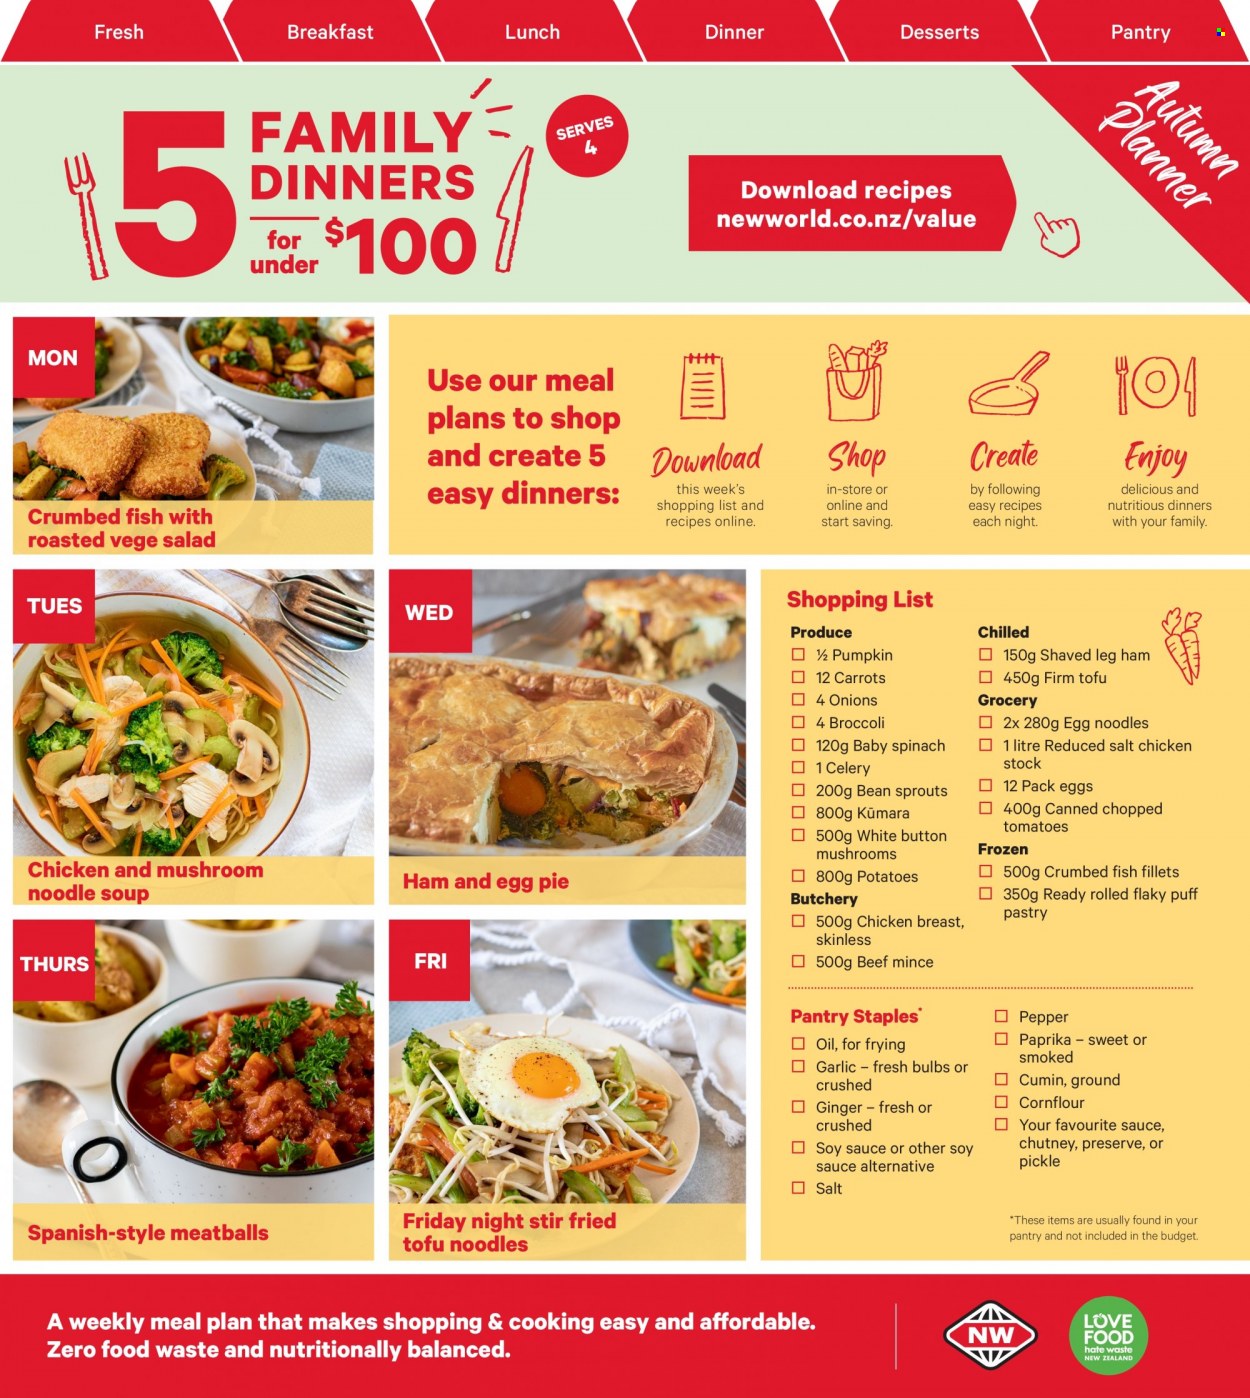 thumbnail - New World mailer - 23.05.2022 - 29.05.2022 - Sales products - pie, broccoli, carrots, celery, garlic, ginger, spinach, tomatoes, potatoes, pumpkin, salad, fish fillets, fish, crumbed fish, meatballs, soup, noodles cup, noodles, ham, leg ham, tofu, corn flour, salt, egg noodles, pepper, cumin, soy sauce, chutney, chicken breasts, beef meat, bulb, bean sprouts. Page 25.